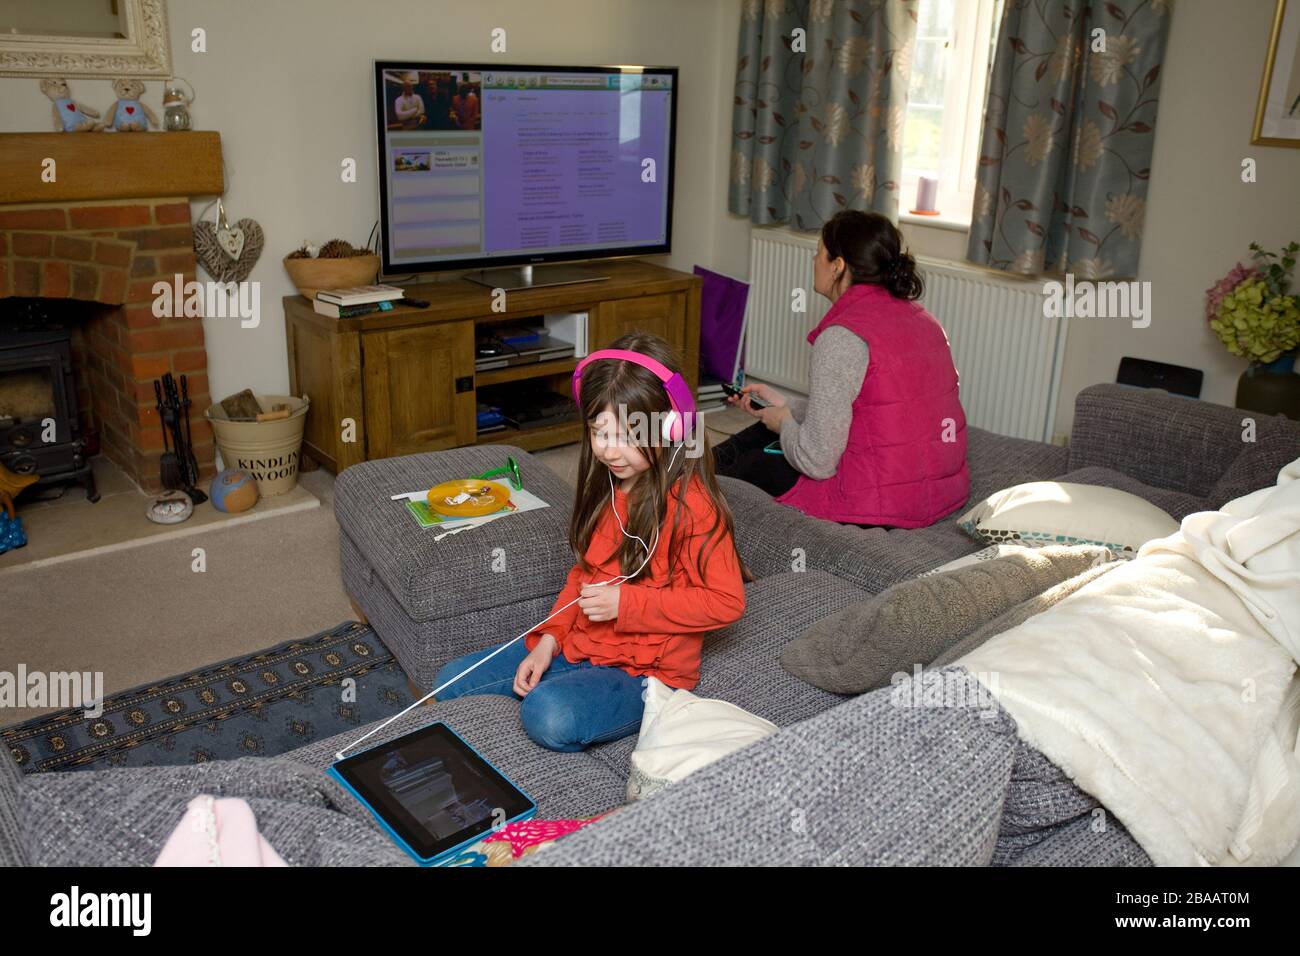 young girl wearing headphones watching iPad and her mother in the background watching television, England Stock Photo